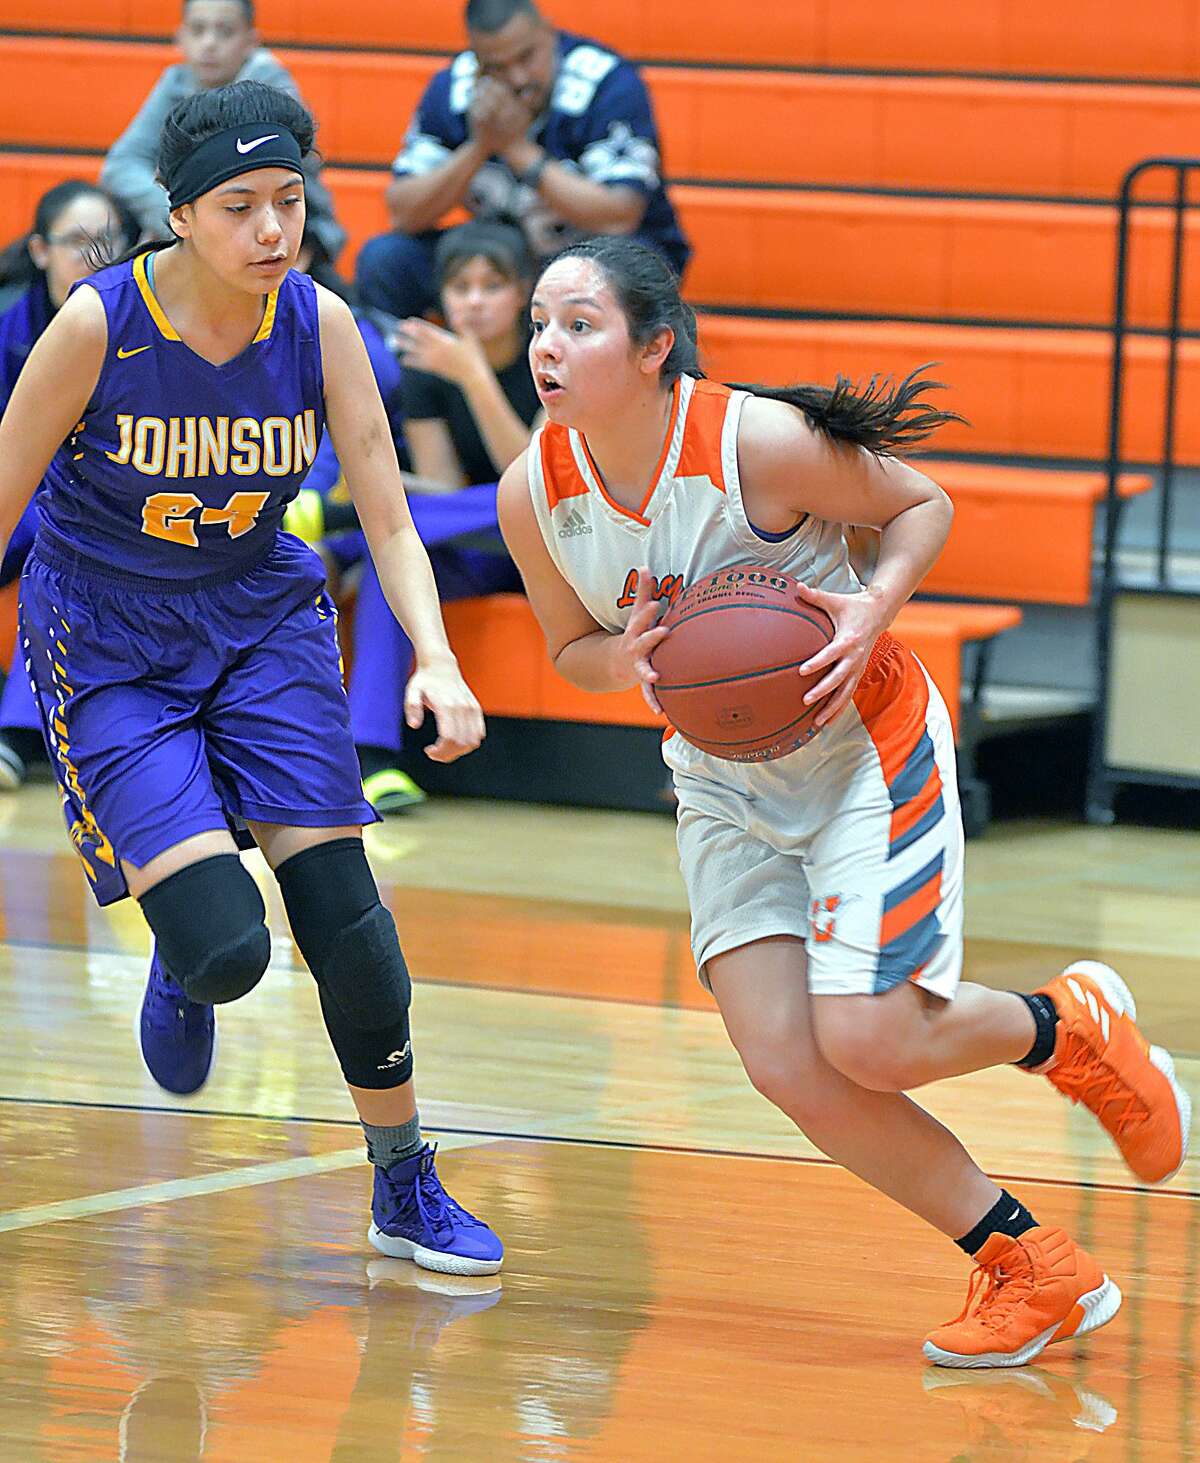 Natalia Trevino had 28 points in United’s 76-31 win over LBJ on Wednesday afternoon. The Lady Longhorns play at Nixon Saturday in a battle of district unbeatens.